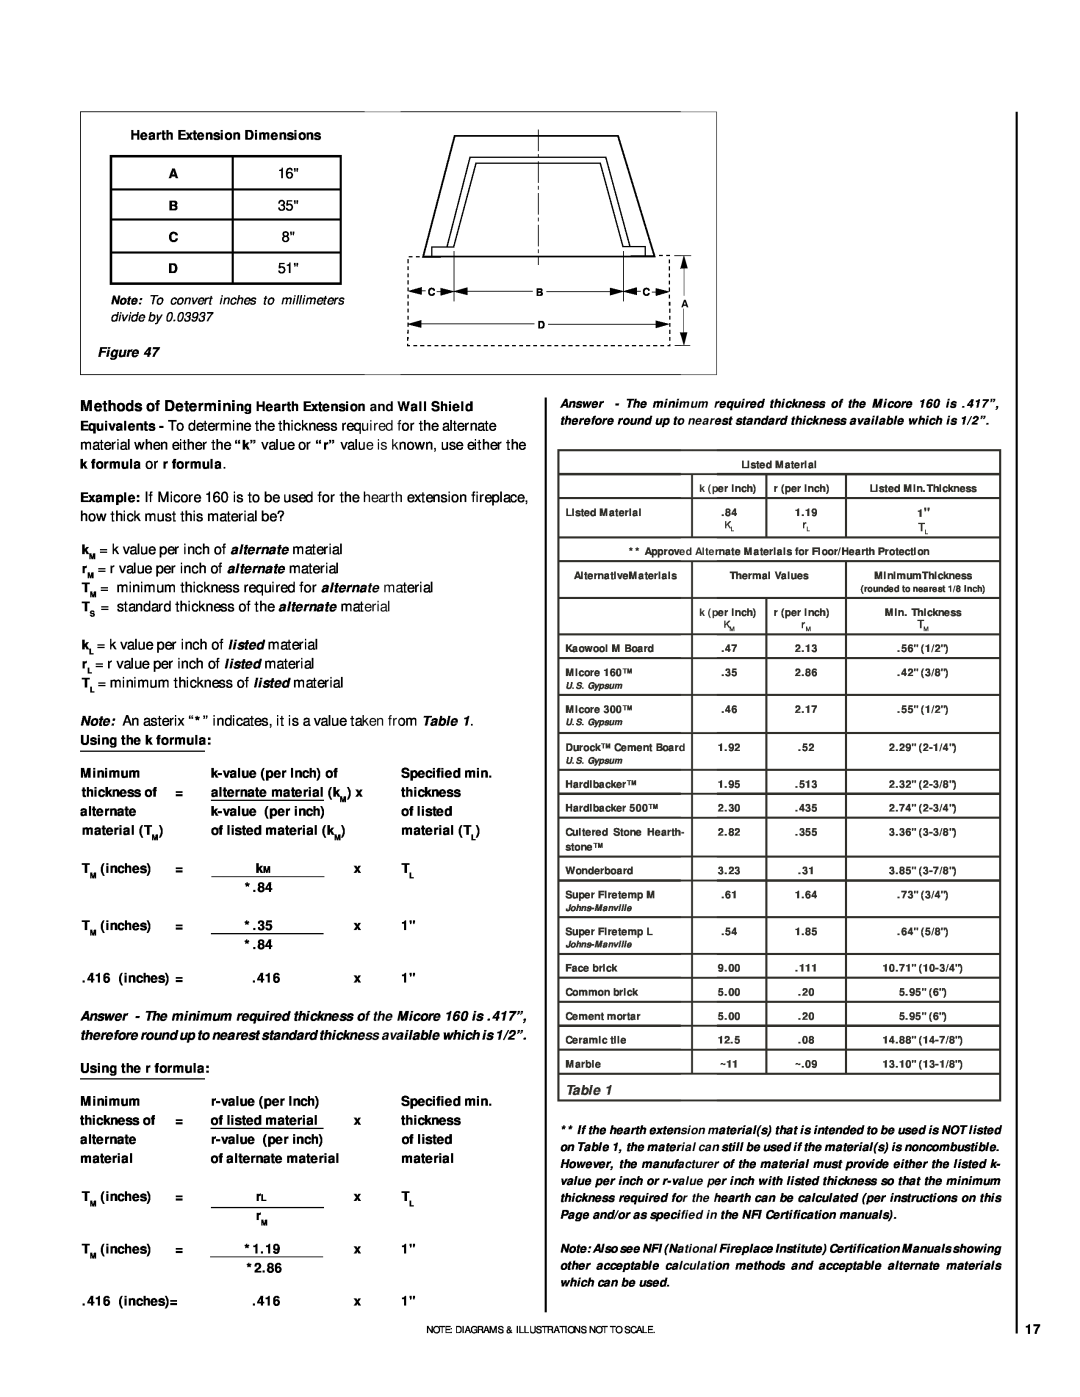 Superior BR-36-2 Hearth Extension Dimensions, Using the k formula, Minimum, k-valueper Inch of, Specified min, thickness 